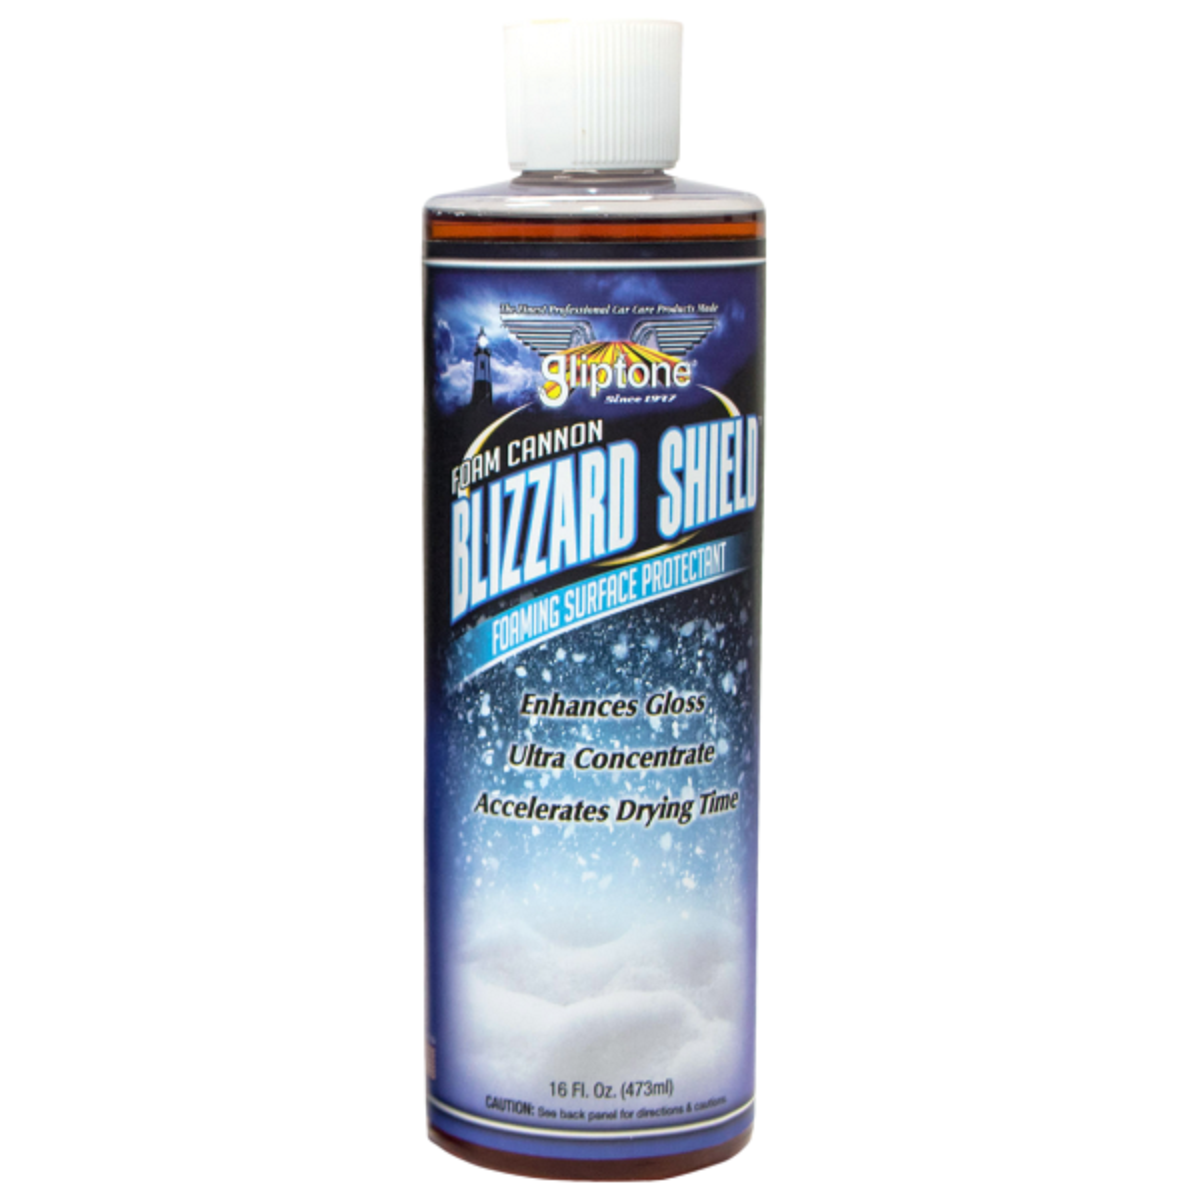 BLIZZARD SHIELD, Foaming Surface Protection 1 gal